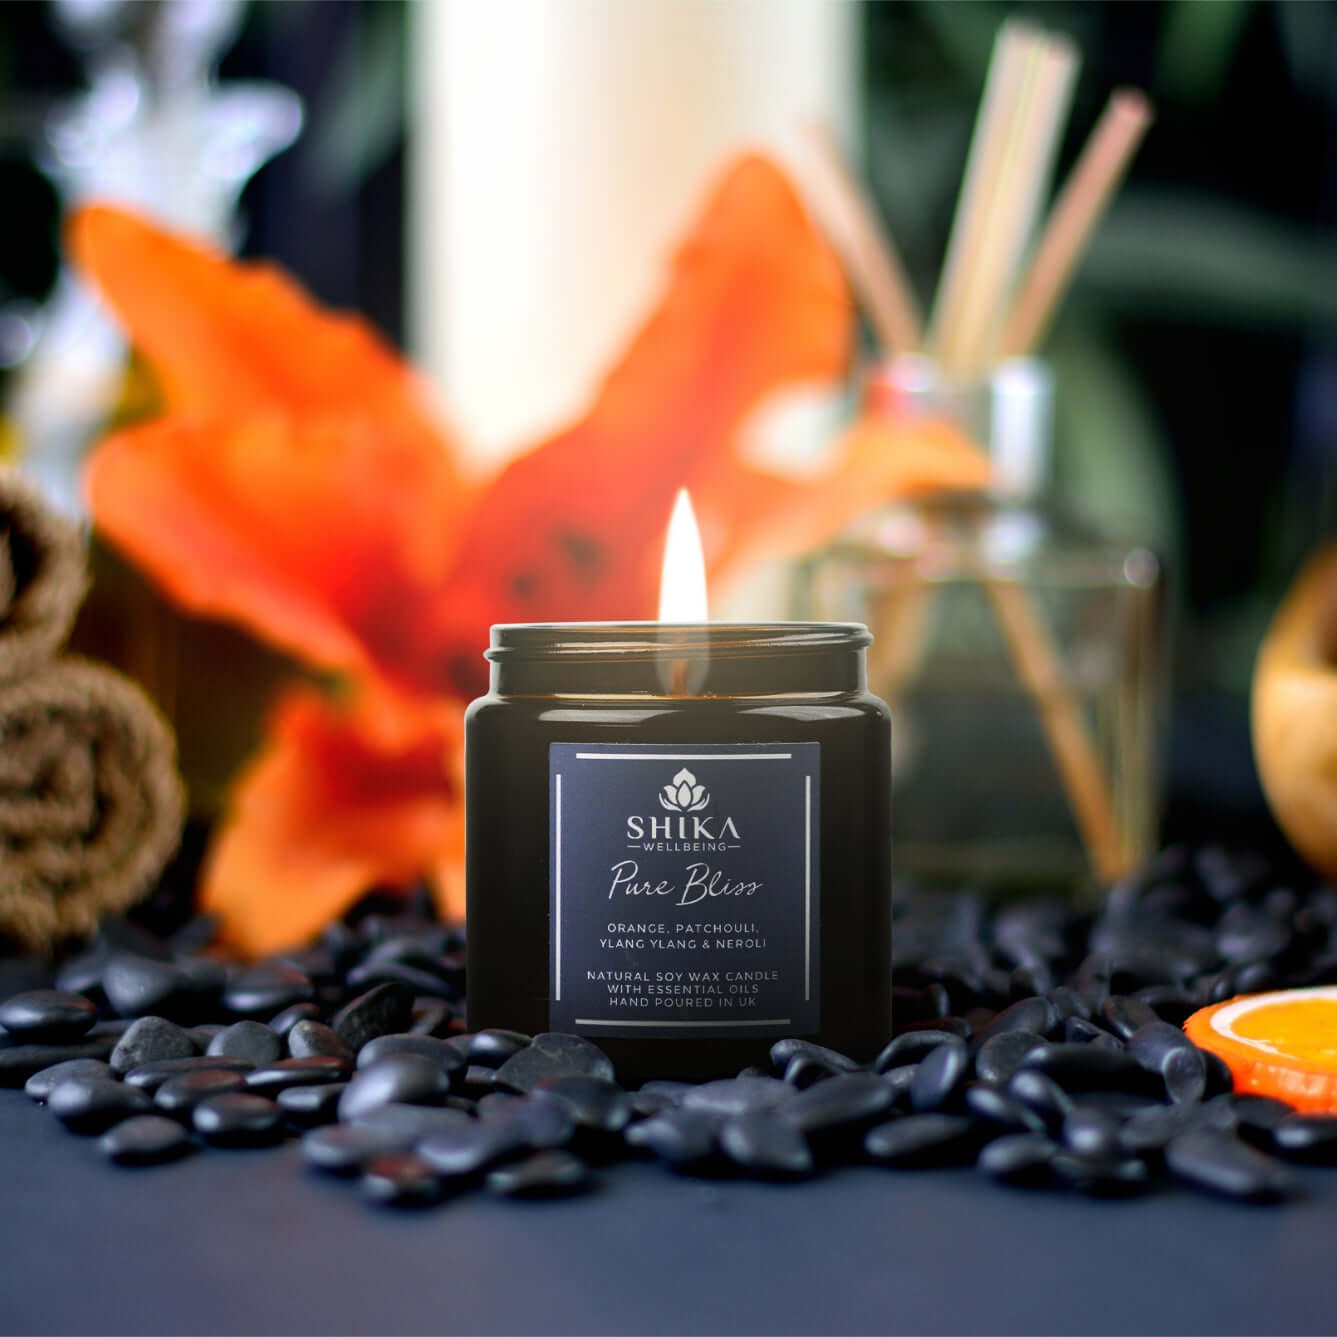 Shika Wellbeing Pure Bliss candle in a gorgeous pharmacy jar for boosting your mood and relaxation